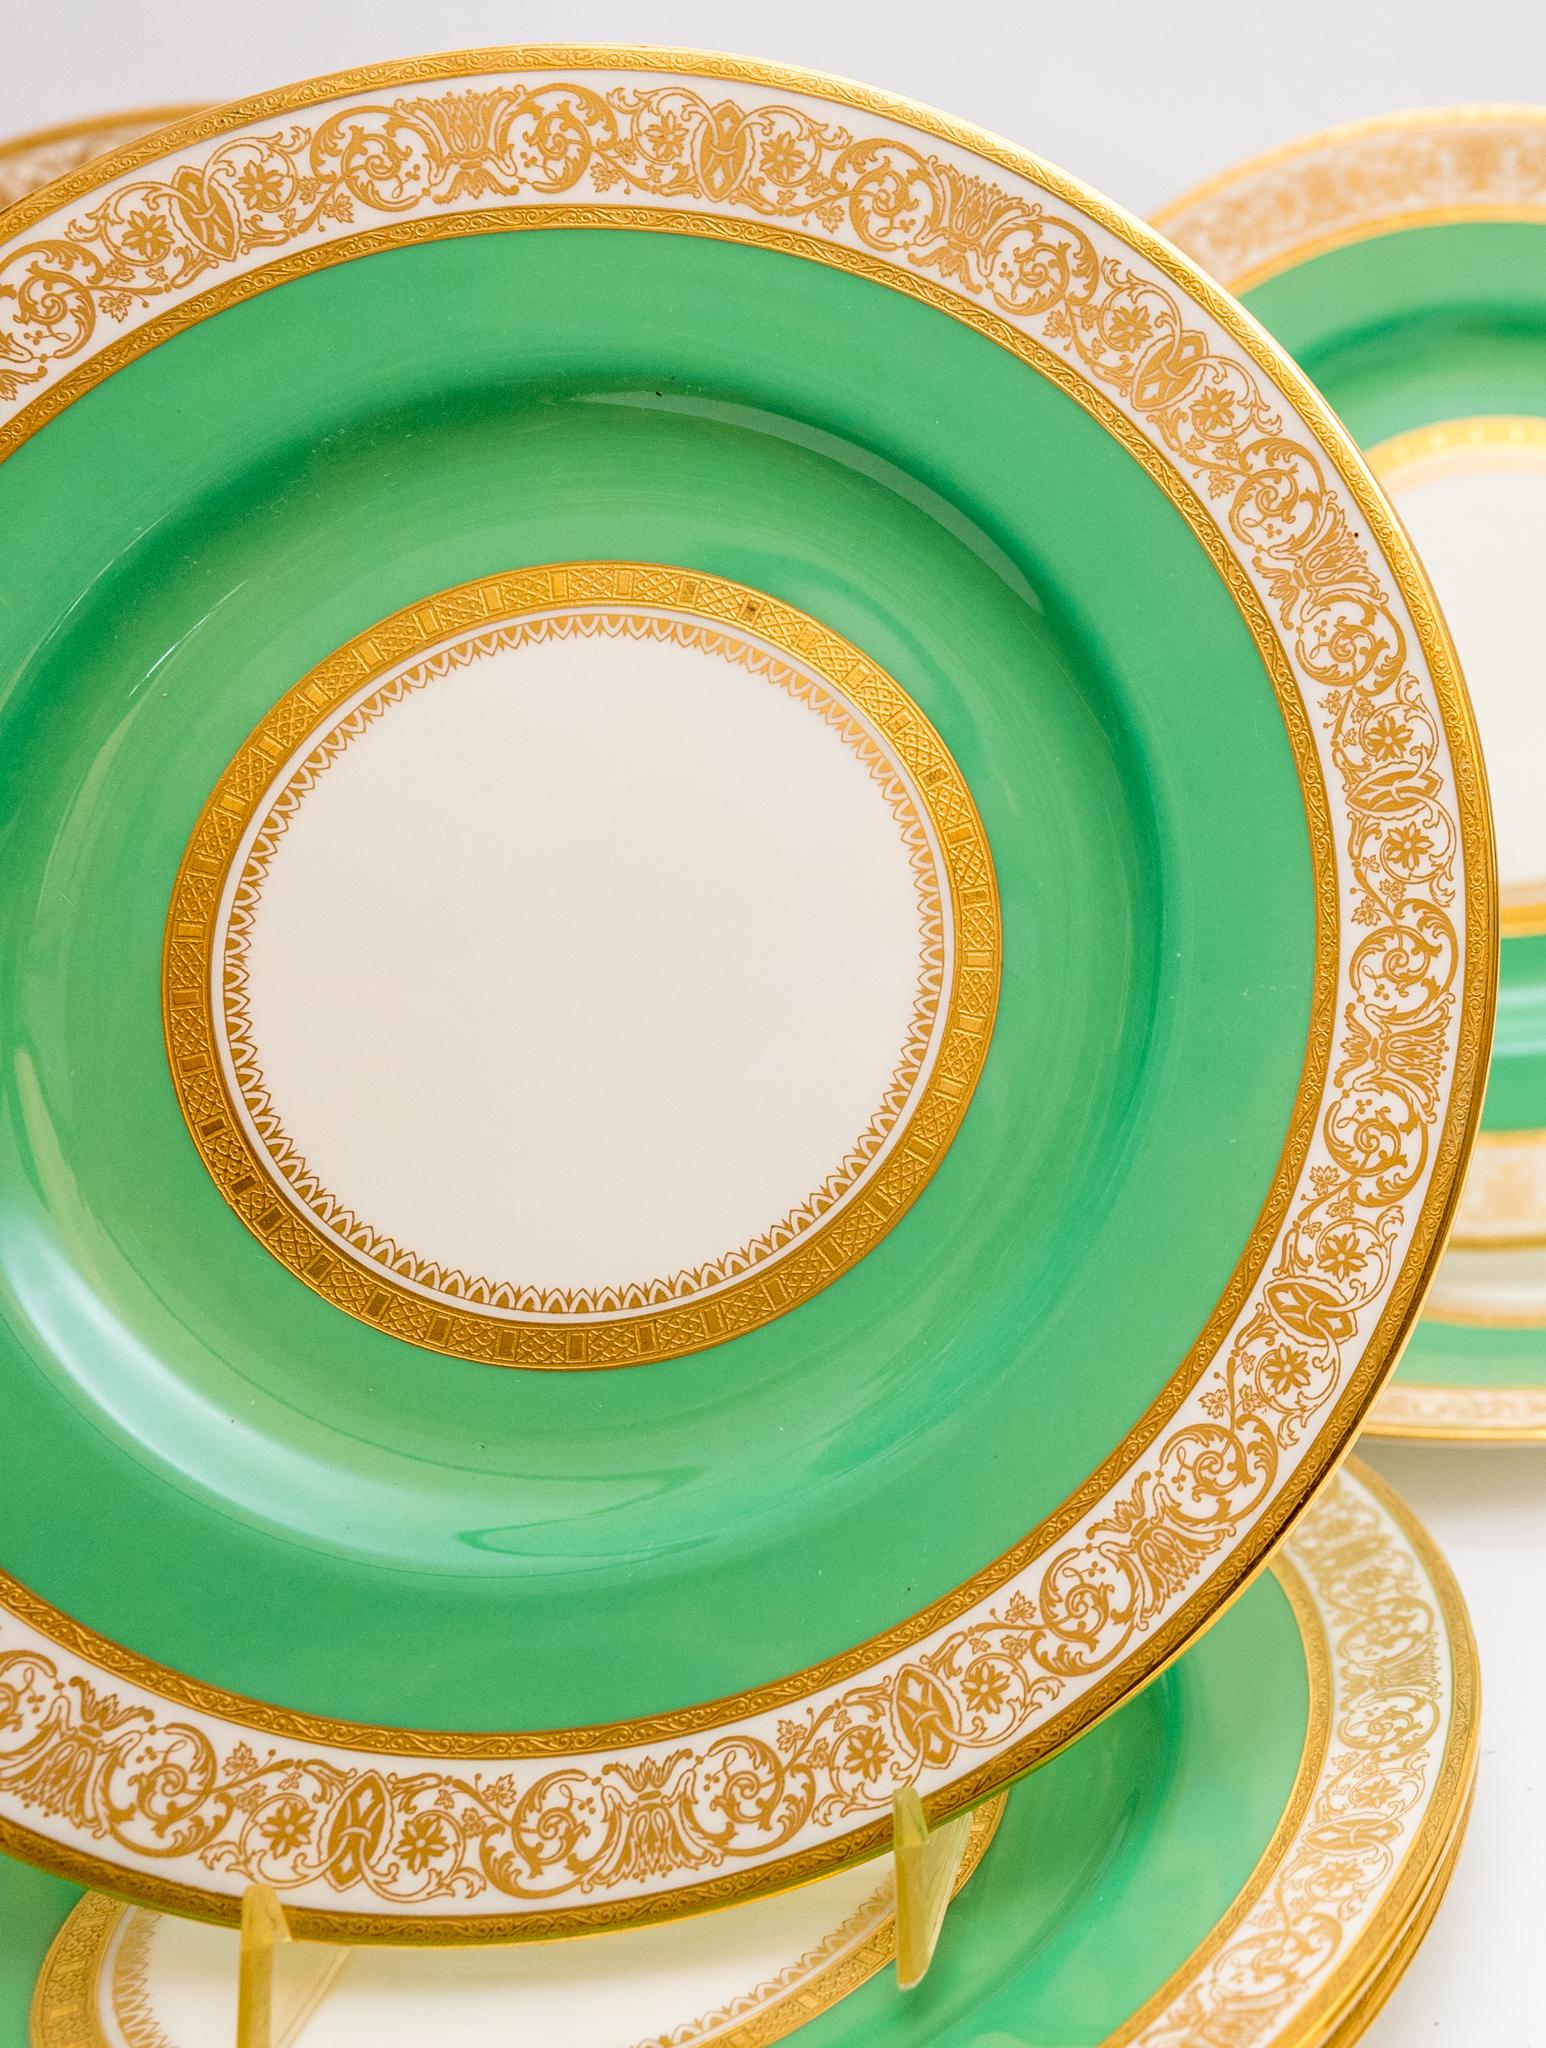 green and gold dinner set